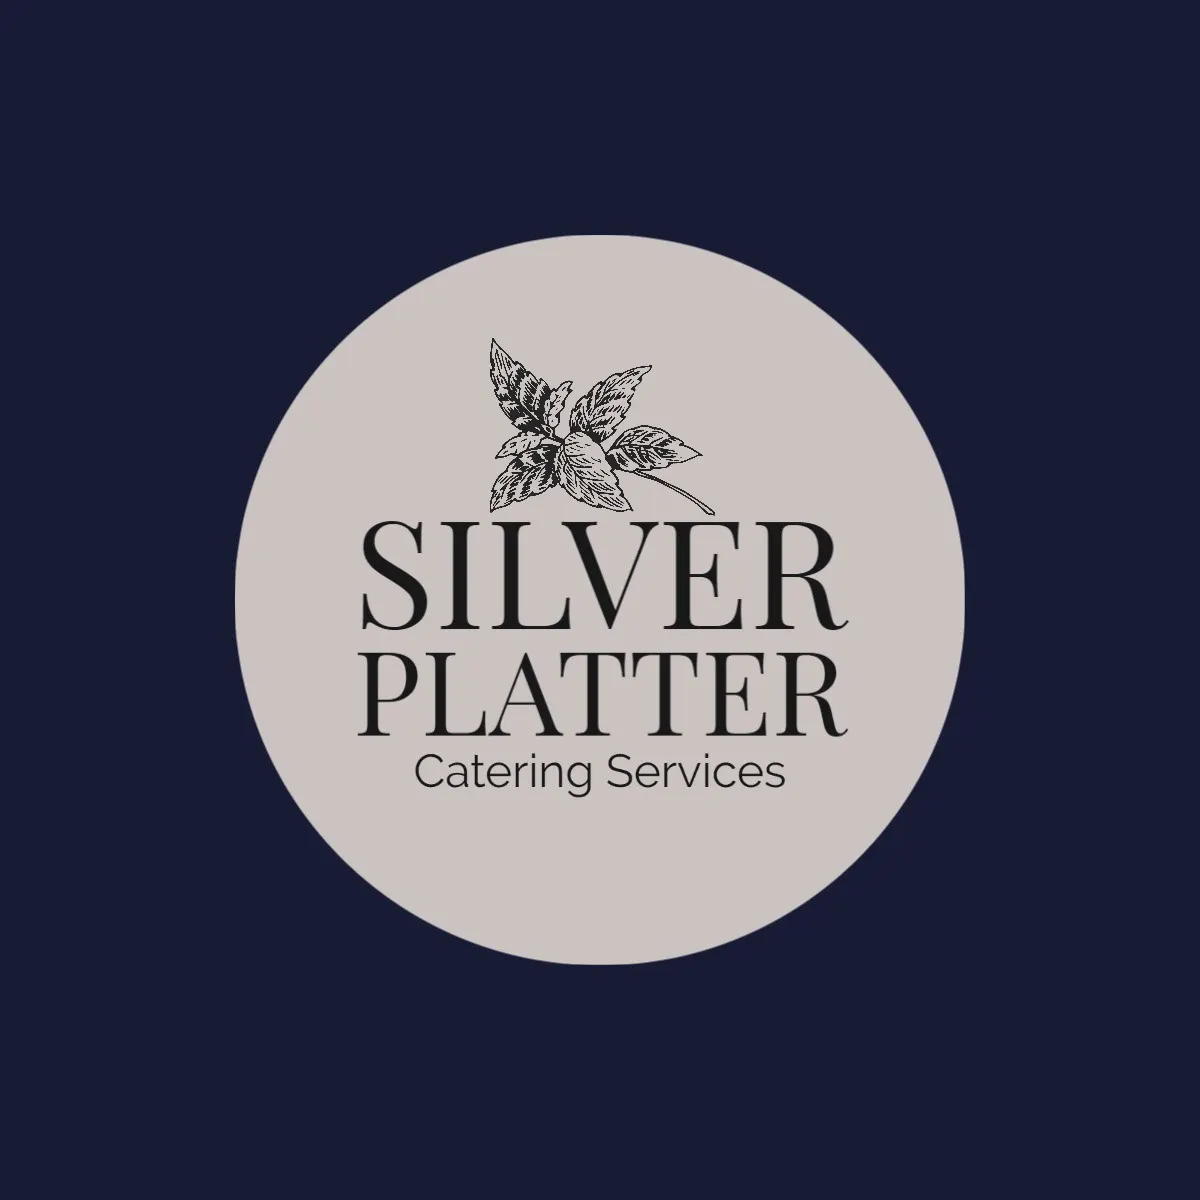 Black Silver Platter Catering services